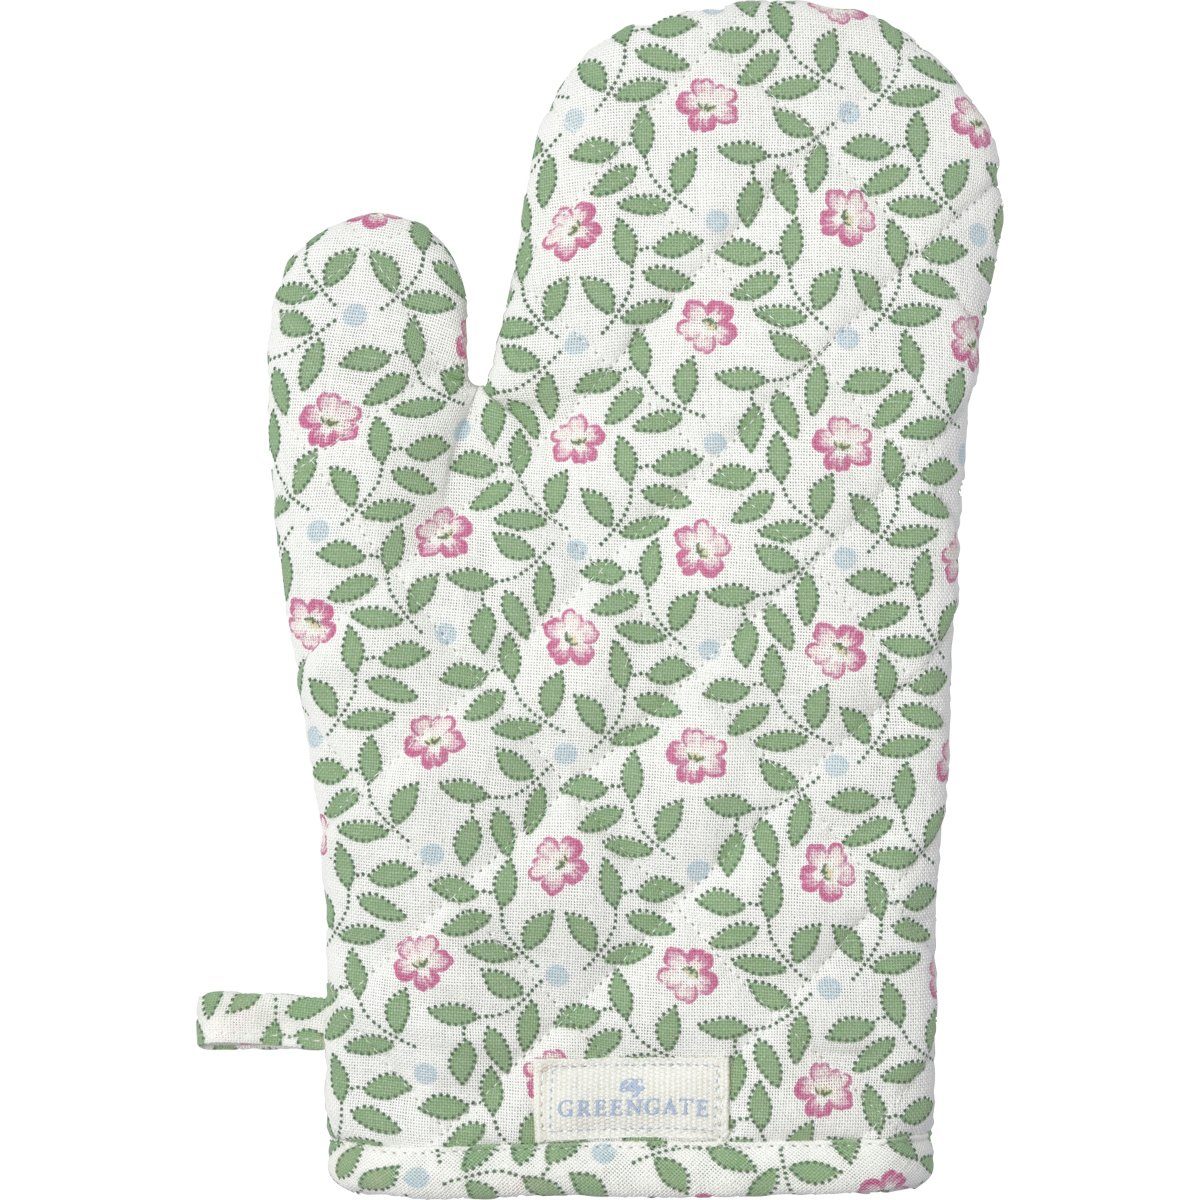 Greengate Topflappen Lotta Grillhandschuh white 28cm, (Grillhandschuhe)